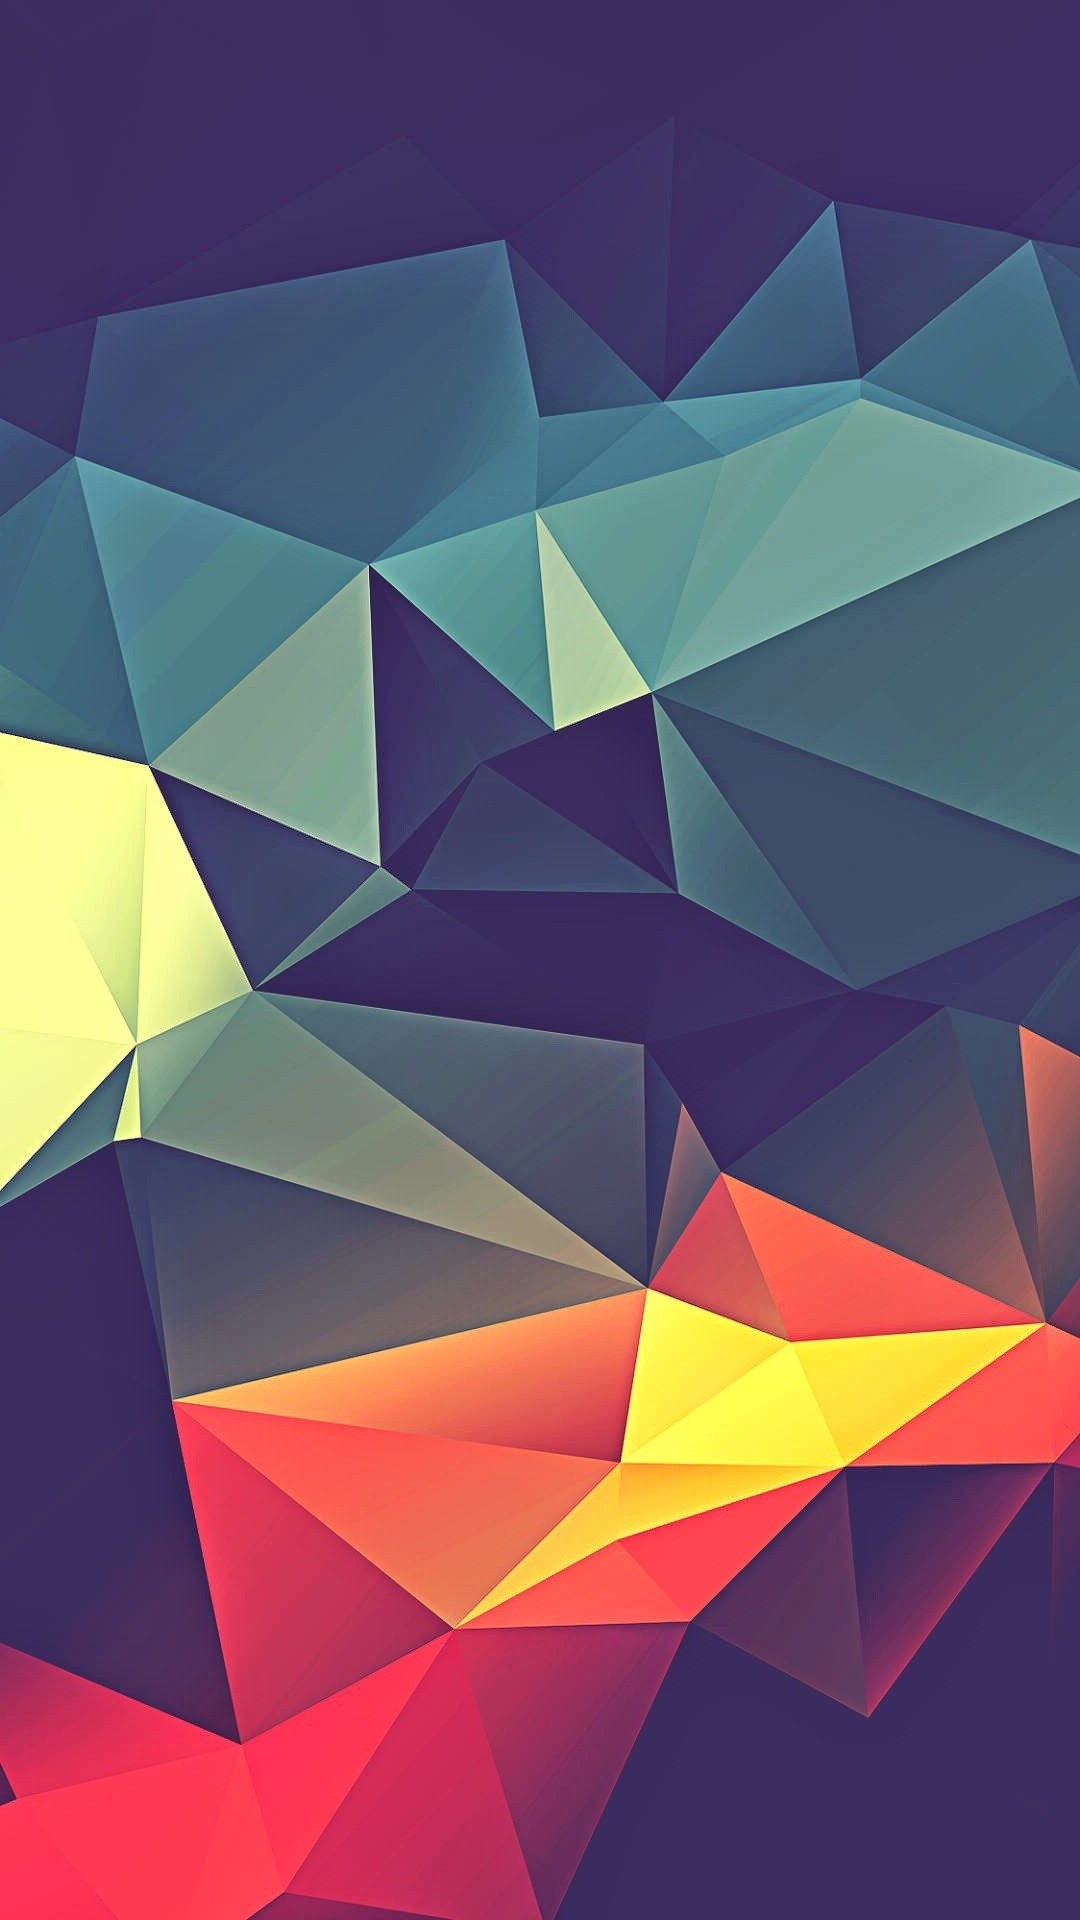 hd abstract wallpaper for mobile,graphic design,pattern,design,triangle,line